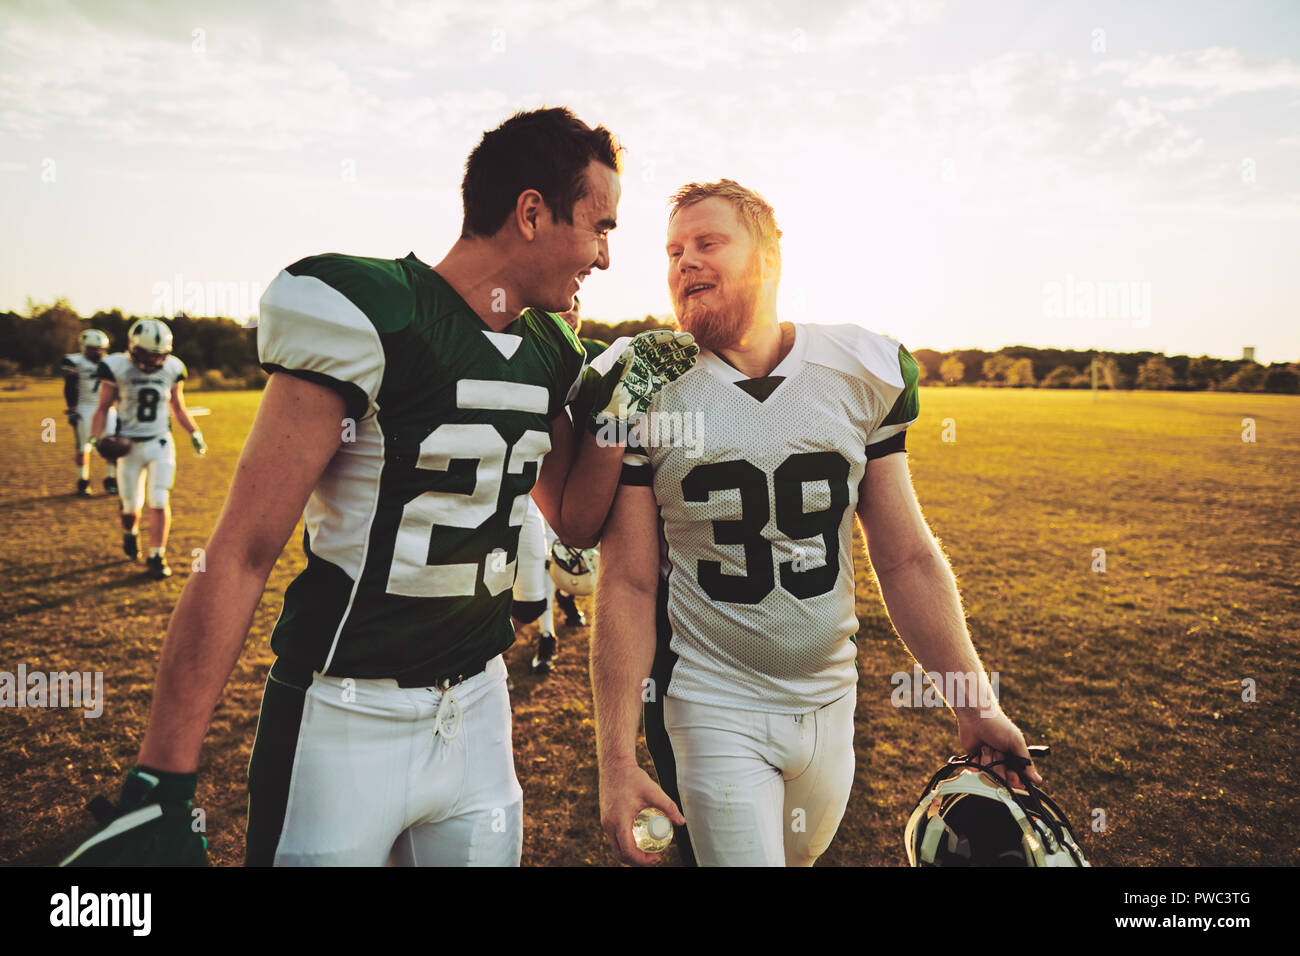 Two smiling American football players talking together while walking off a field after practice on a sunny afternoon Stock Photo